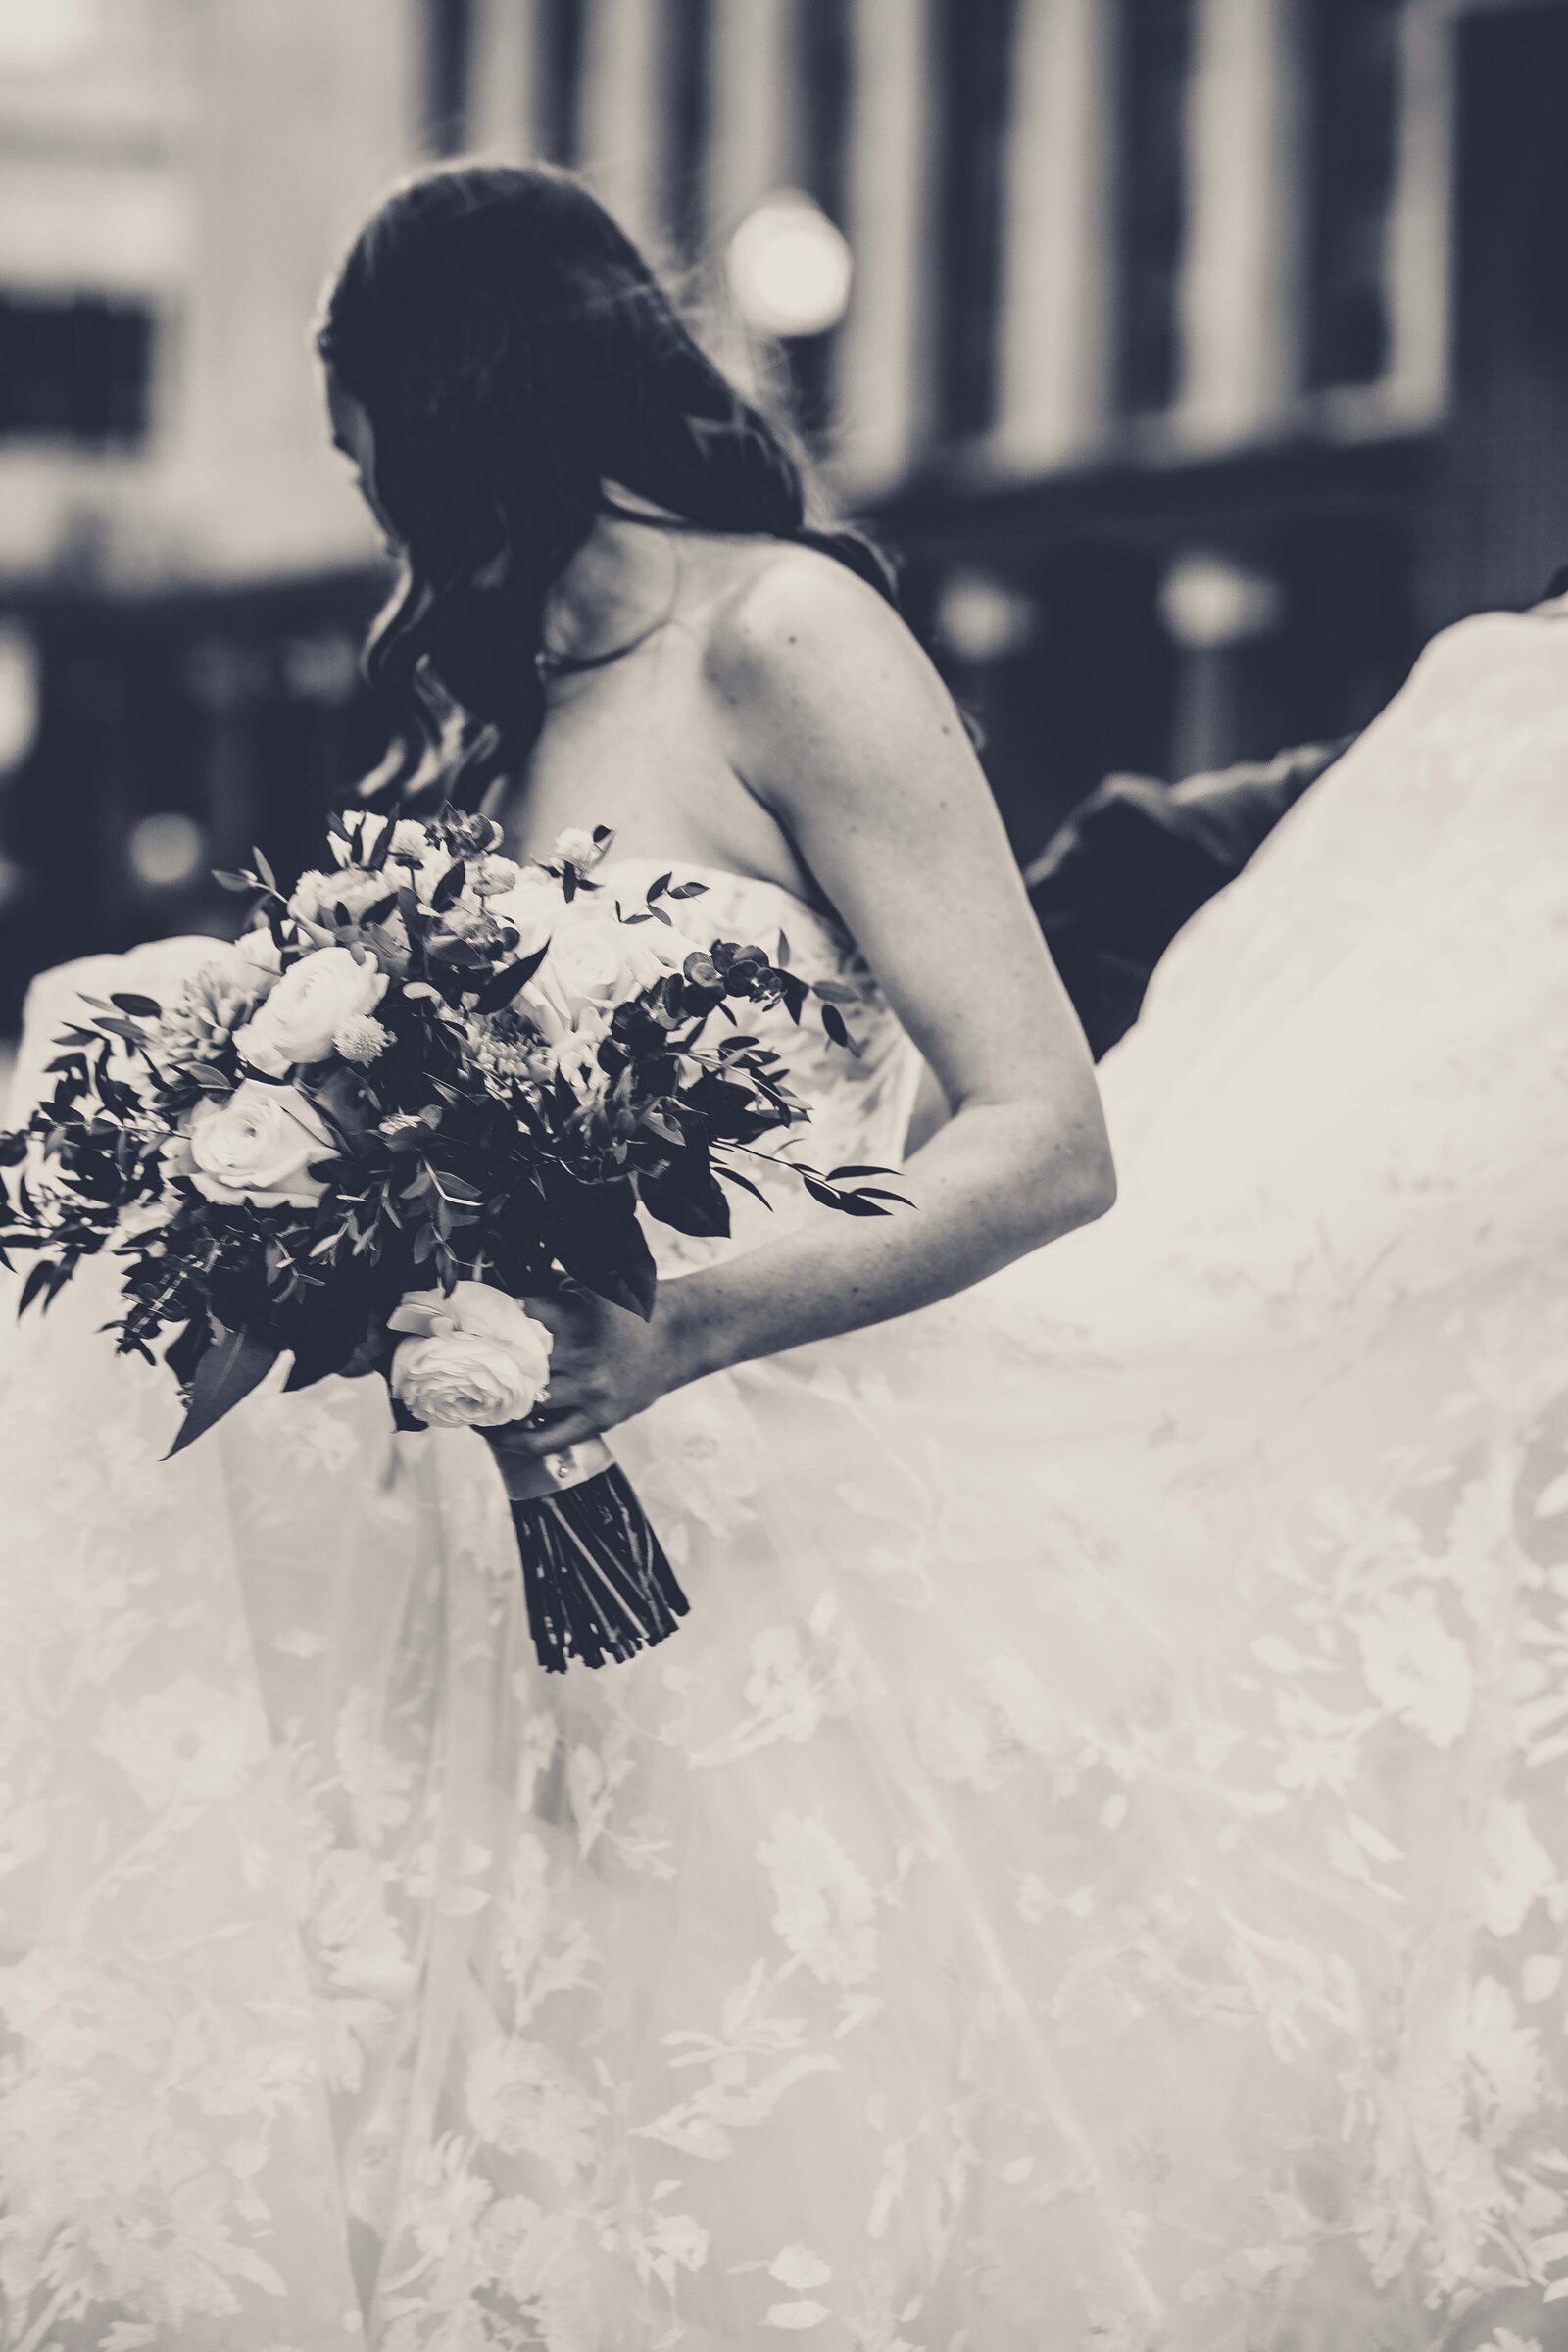 Capture the timeless elegance of this black and white photograph featuring a radiant bride holding her beautiful bouquet. The image highlights a moment of bridal grace, as her exquisite gown is delicately fluffed, adding a dynamic and flowing element to the scene. Perfect for those who appreciate the classic charm of monochrome photography, this photo beautifully combines the purity of the bride's joy with the intricate details of her wedding dress and floral arrangement.